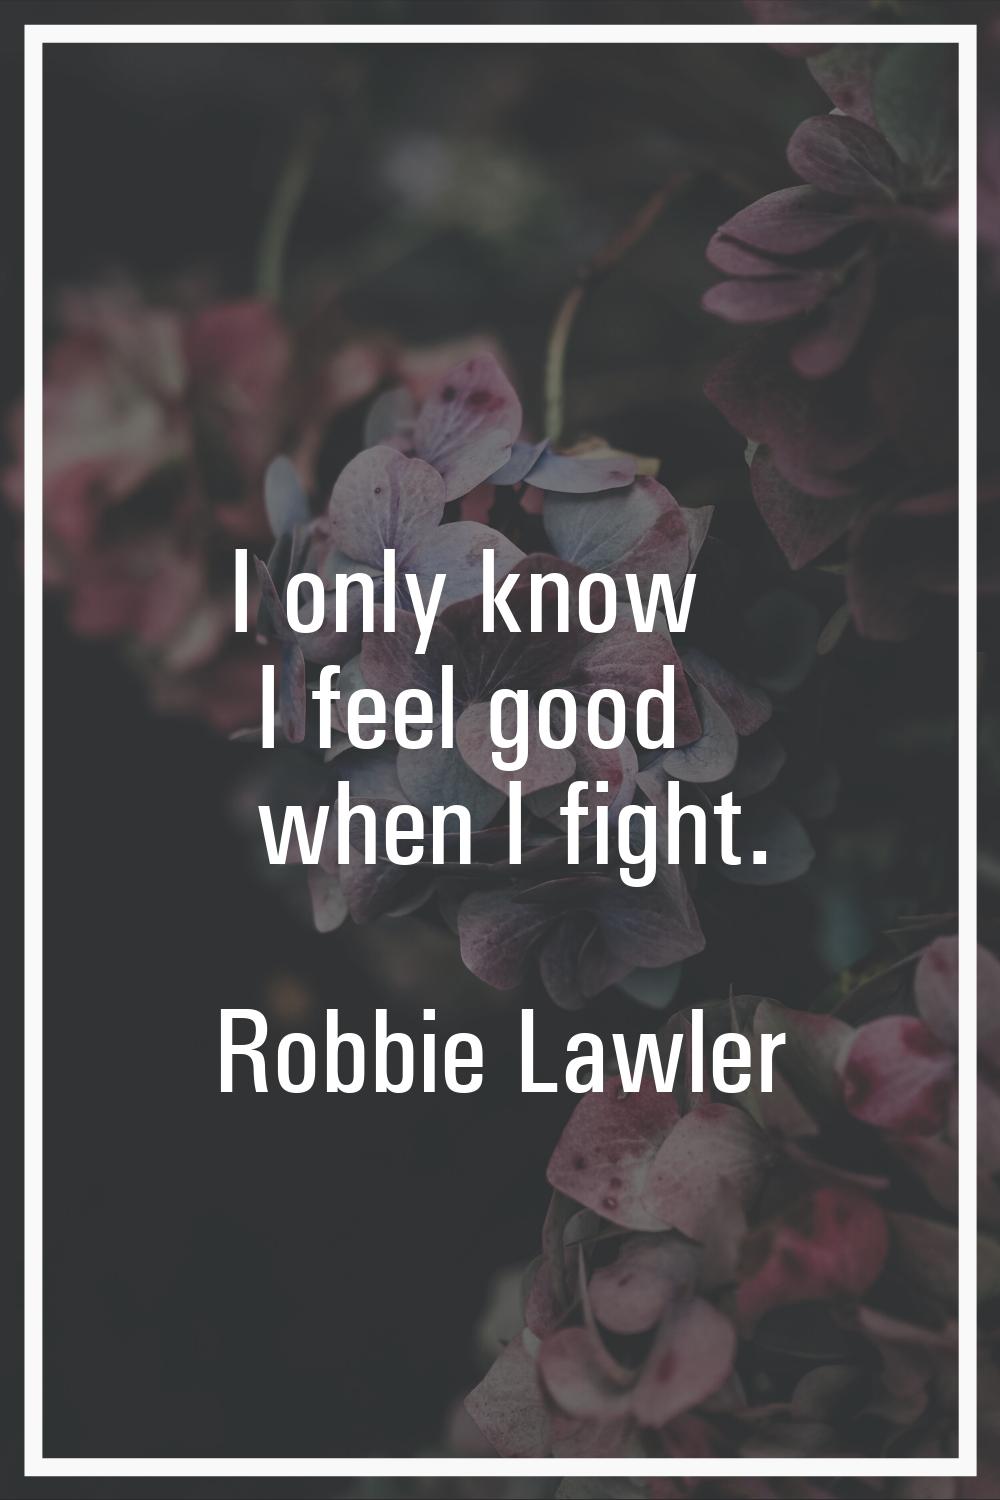 I only know I feel good when I fight.